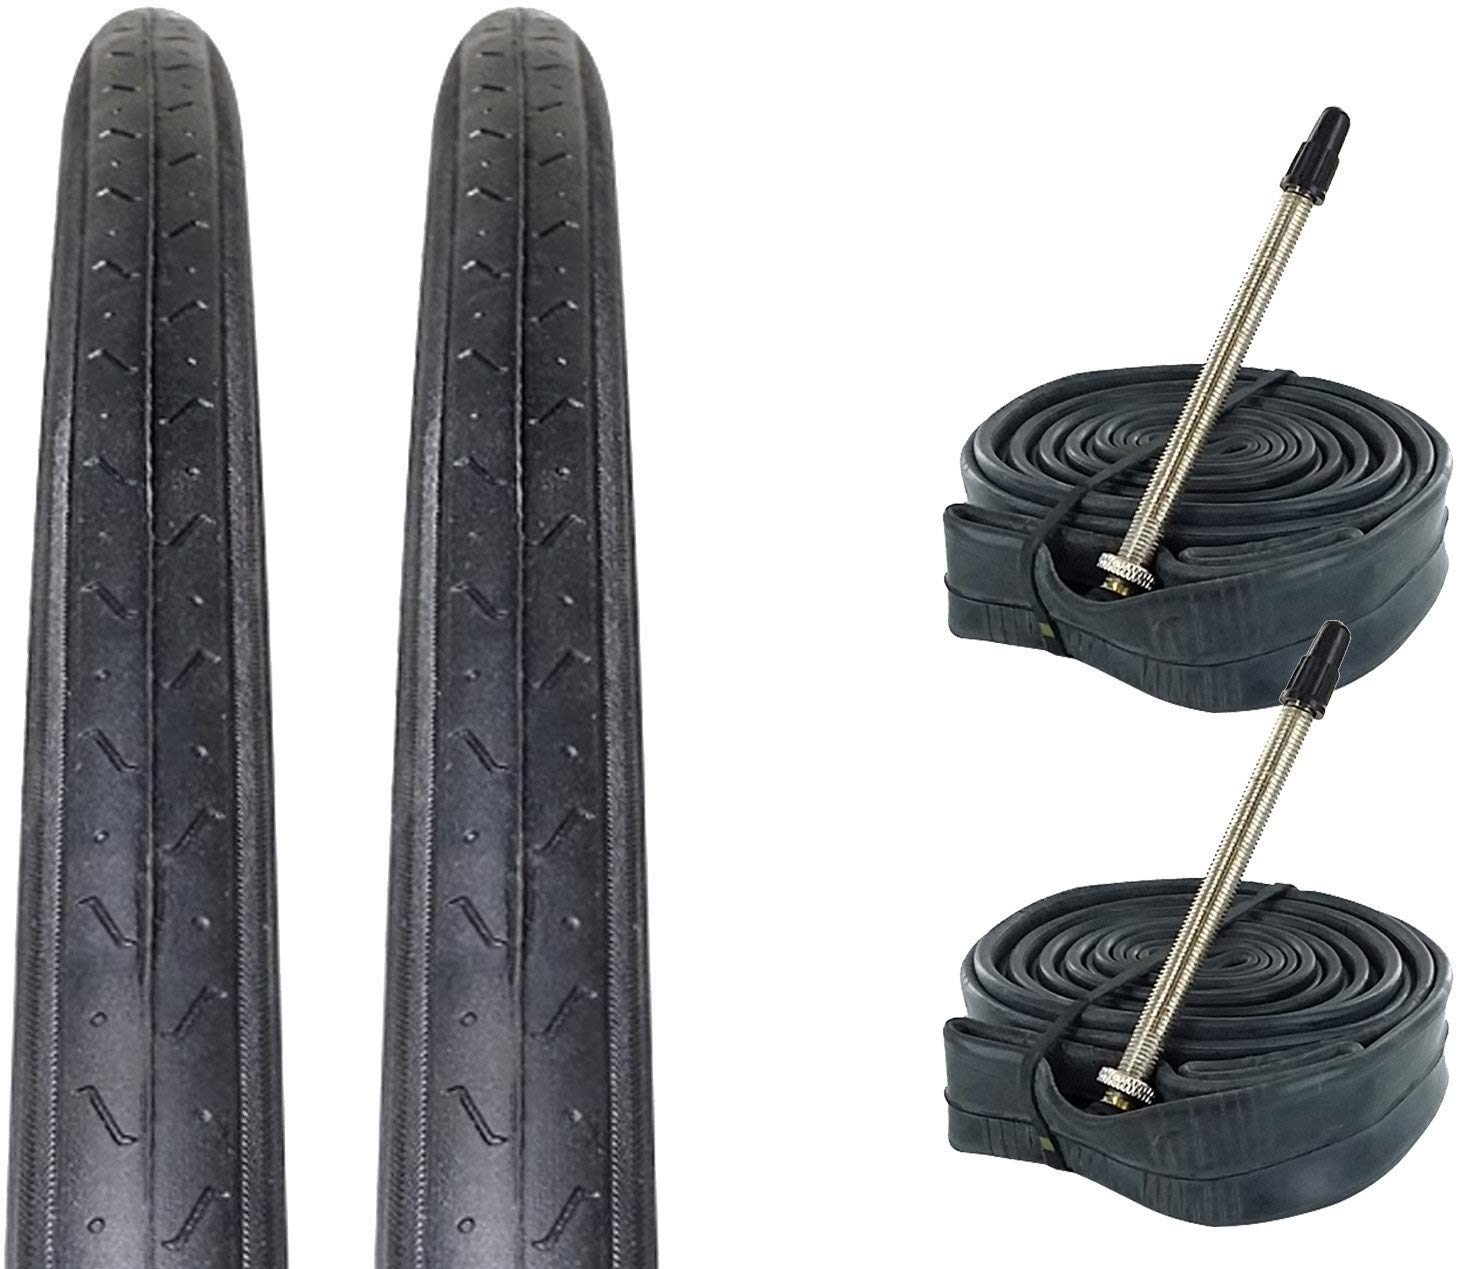 ZOL Bundle Pack Z1179 Road Tires and Tube 700x23C, Presta/French 80 MM Valve - Zol Cycling